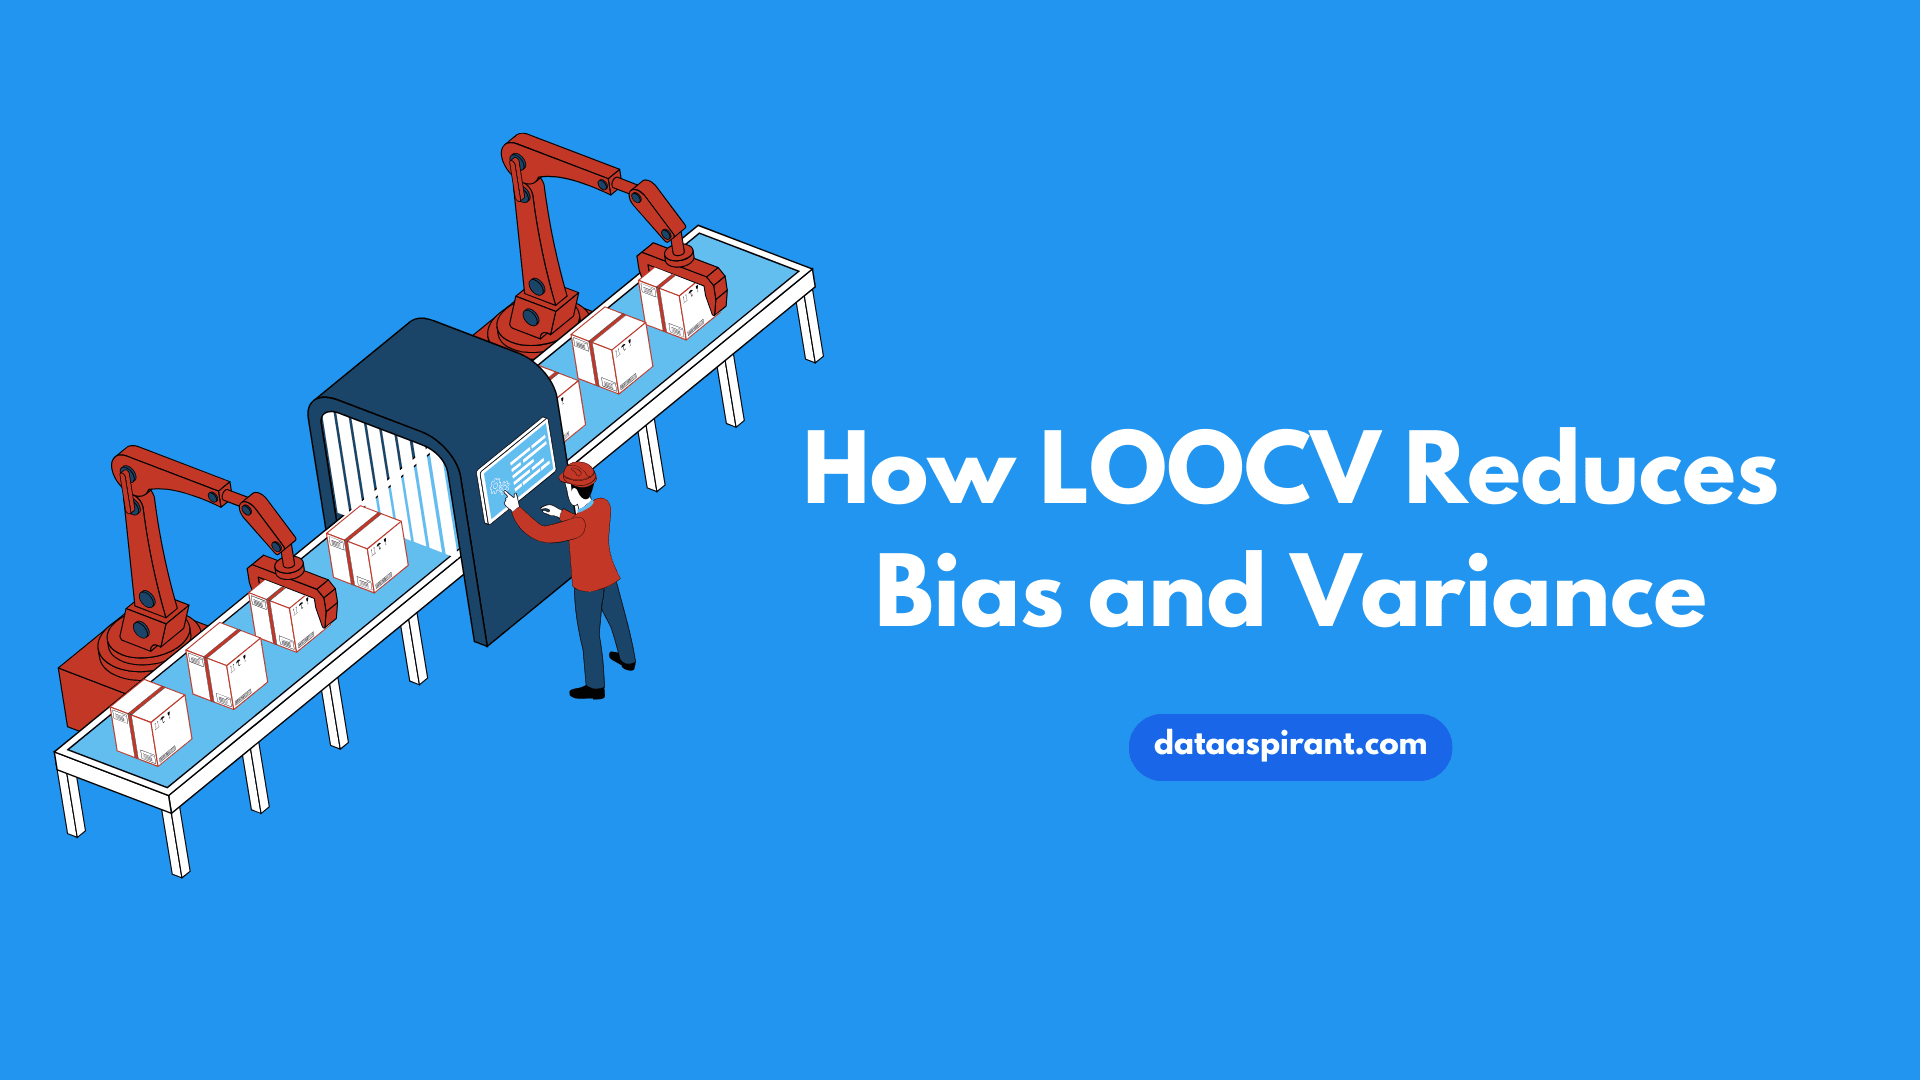 How LOOCV Reduces Bias and Variance